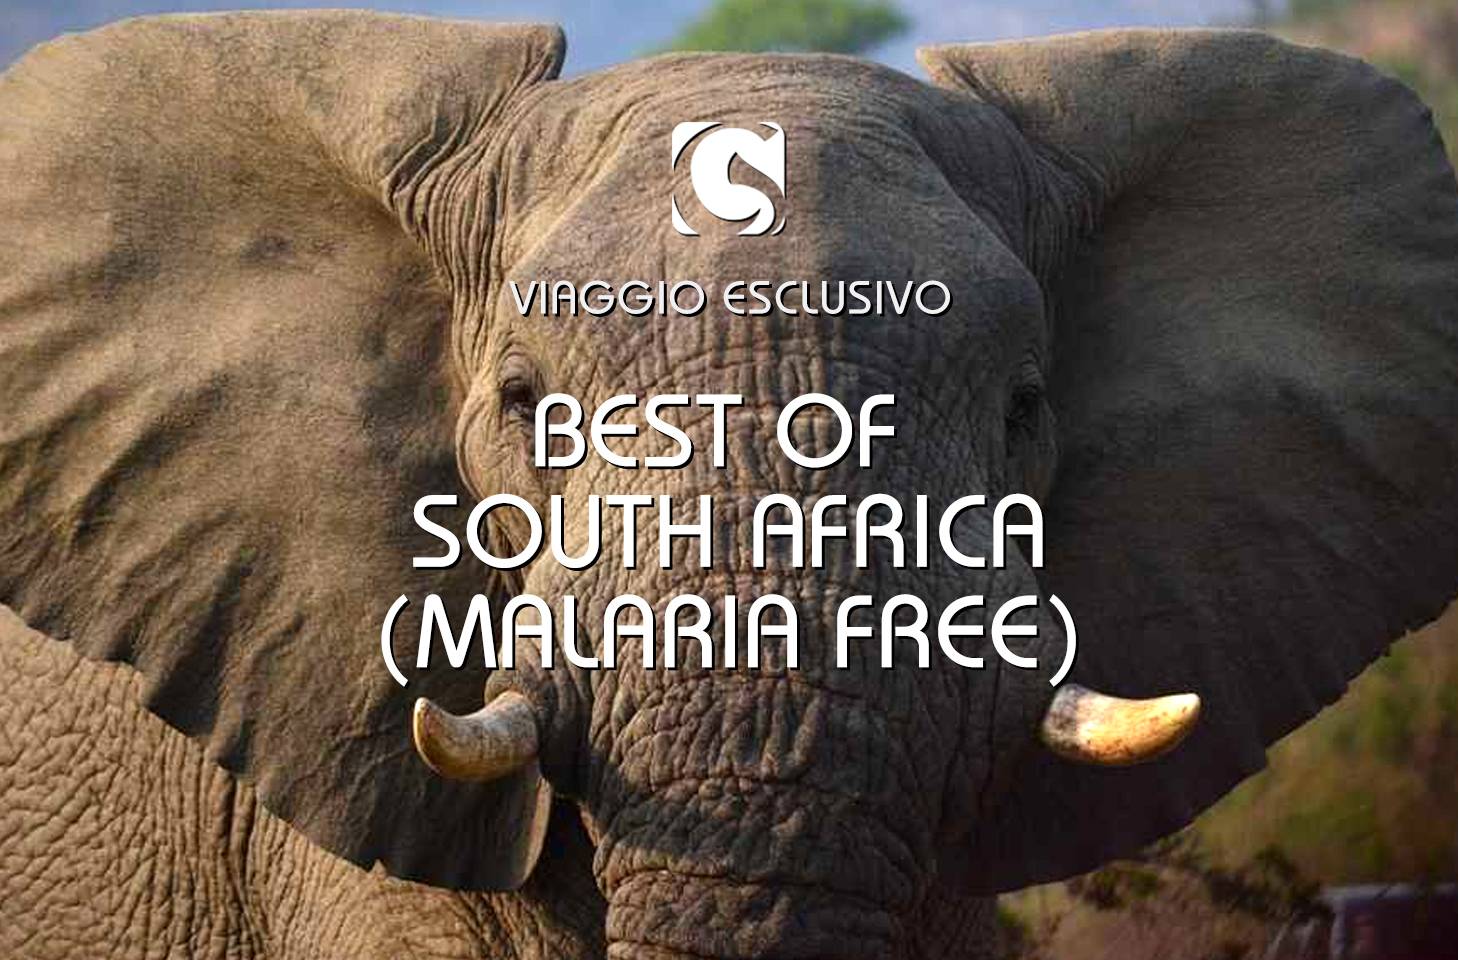 BEST OF SOUTH AFRICA (MALARIA FREE)